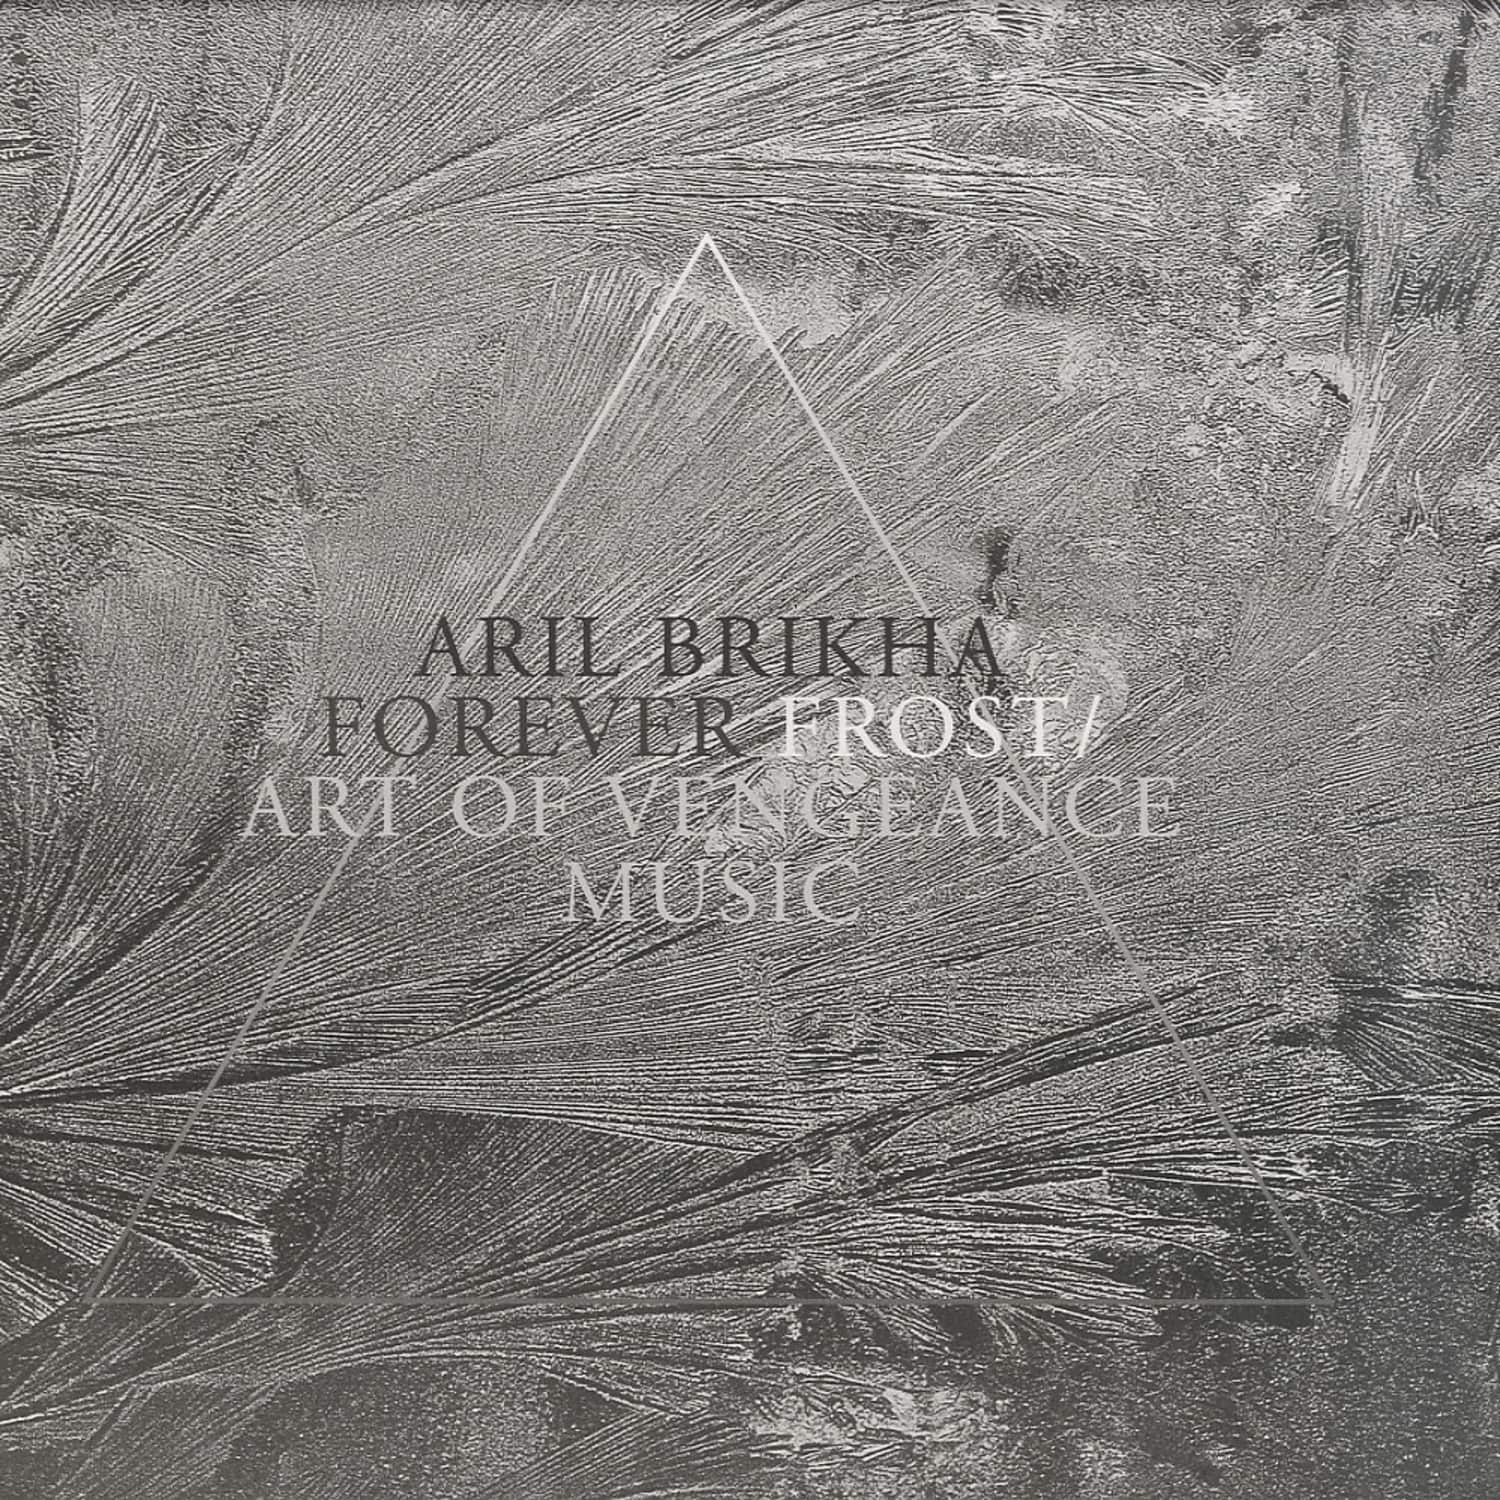 Aril Brikha - FOREVER FROST